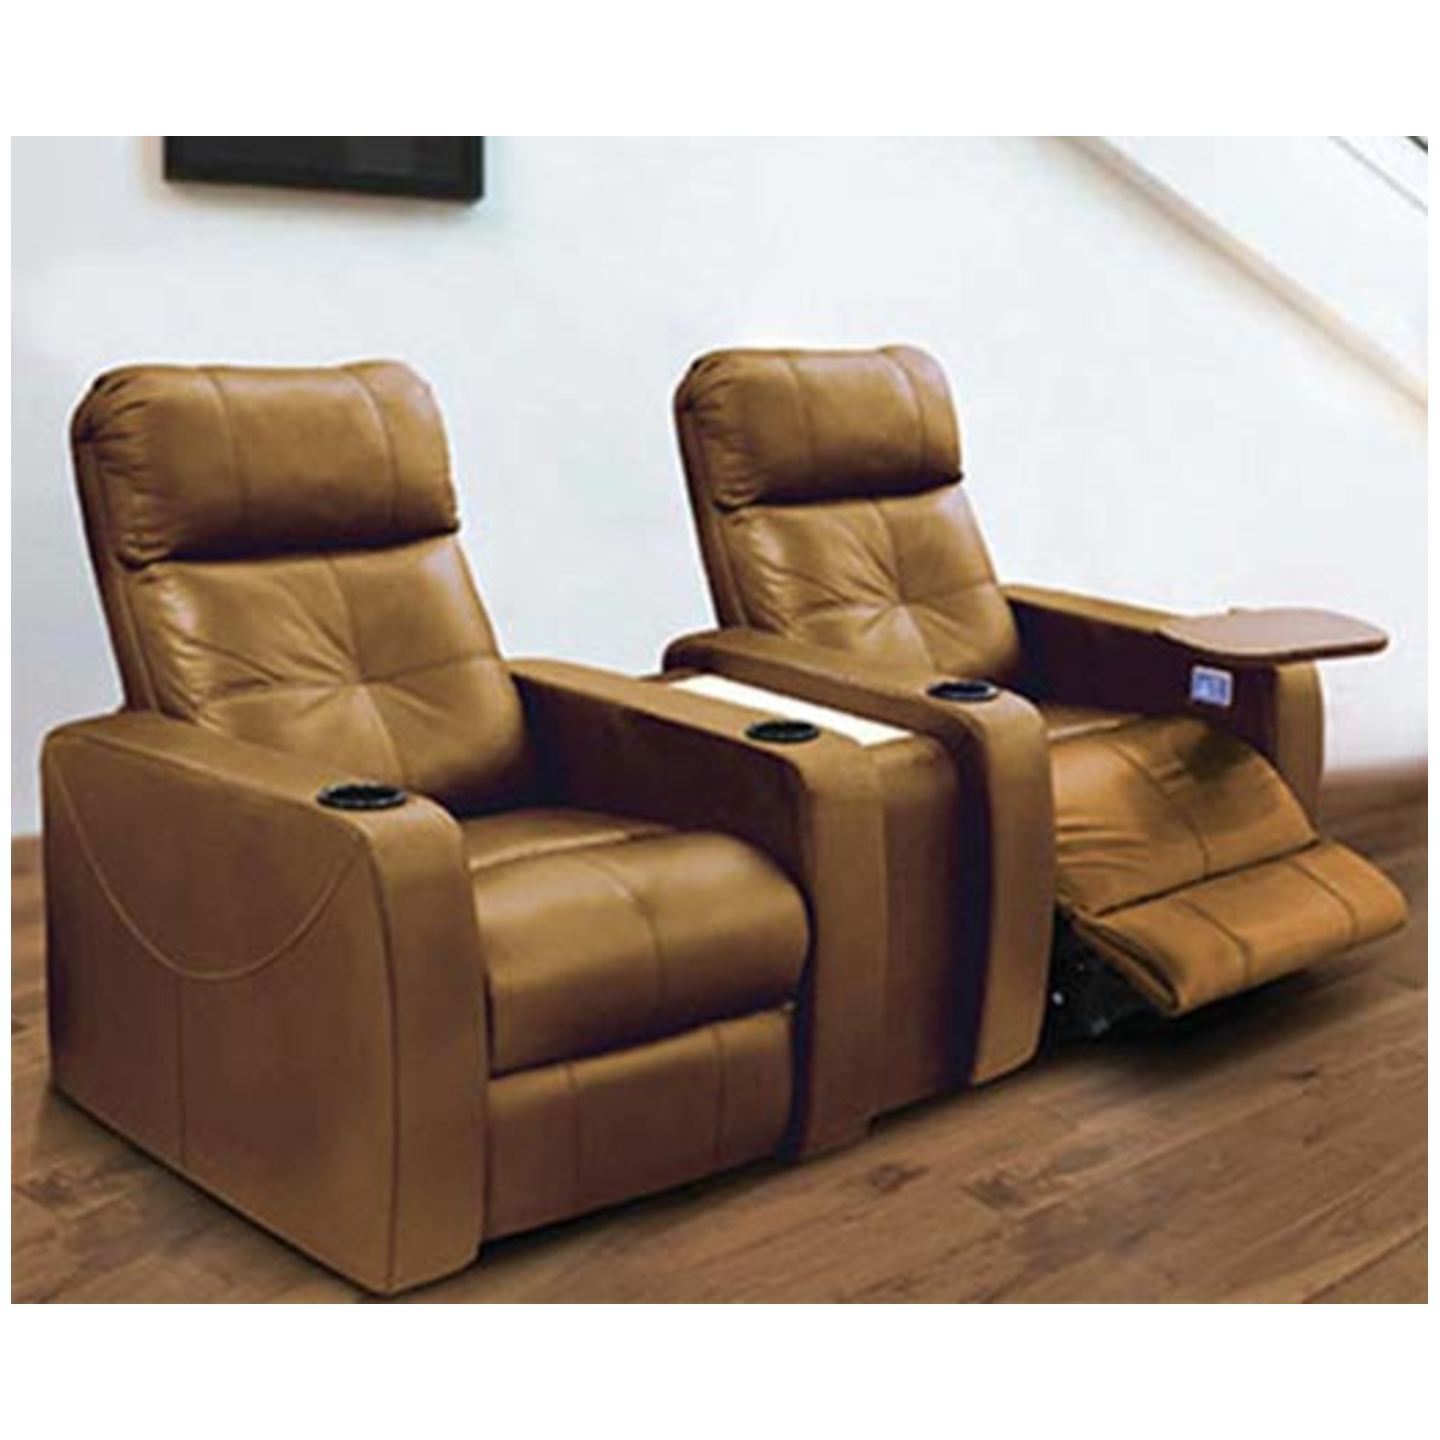 LN Recliner Chair Armonia Electronic System In Brown Colour